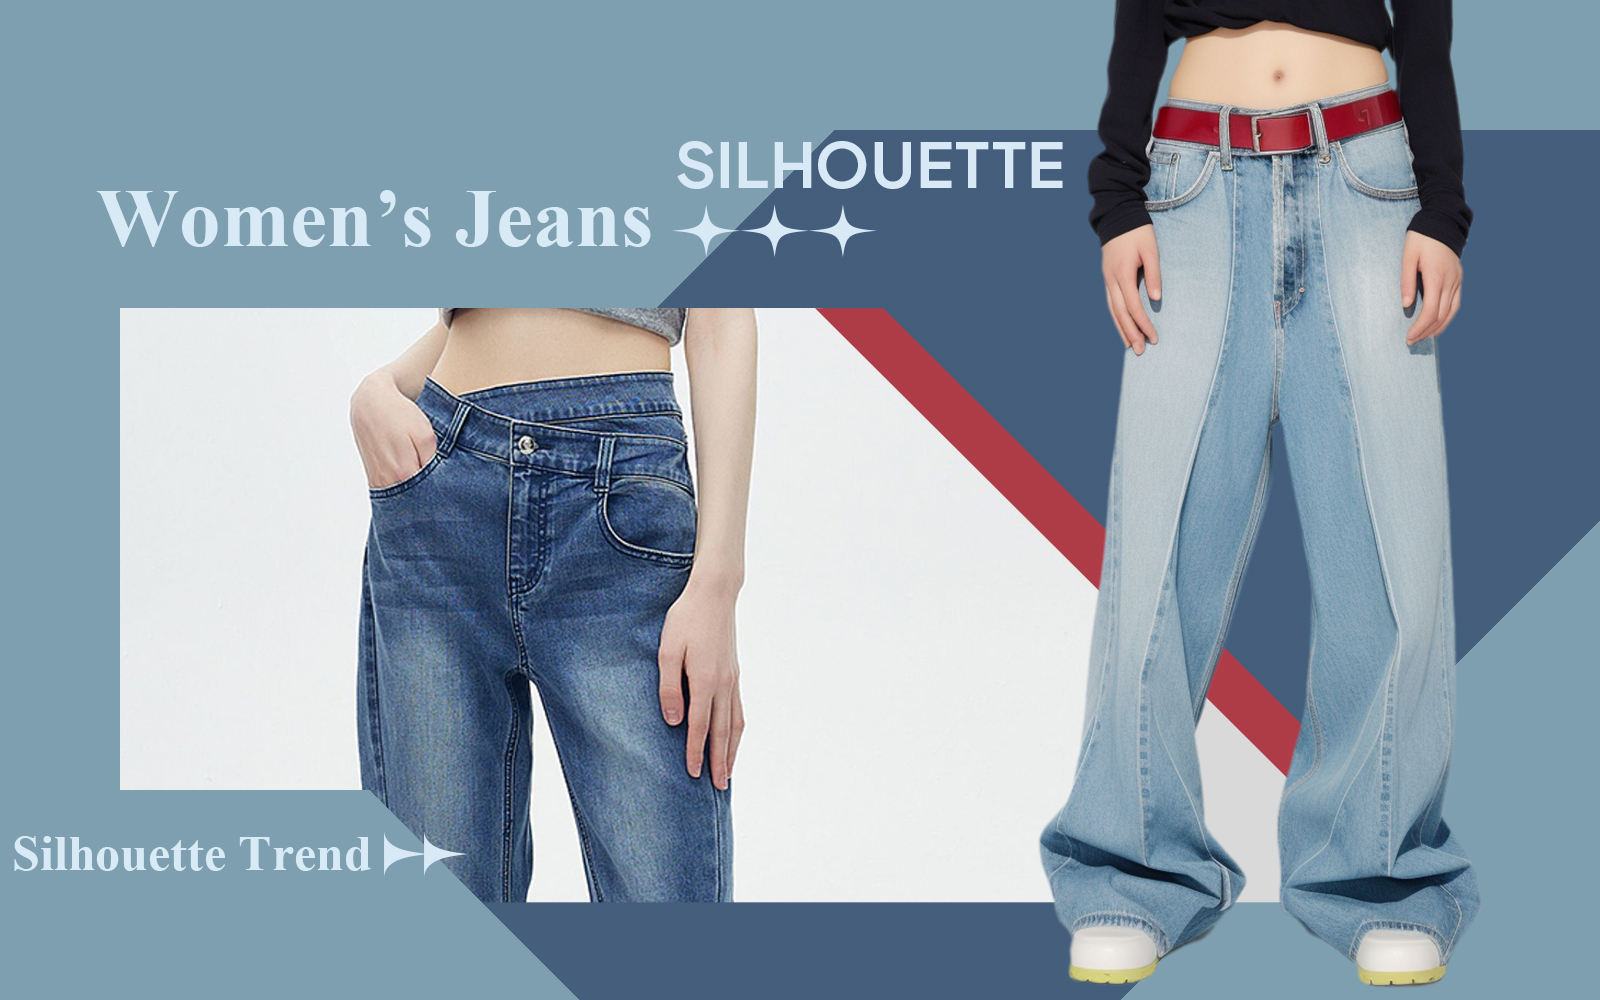 The Silhouette Trend for Women's Jeans